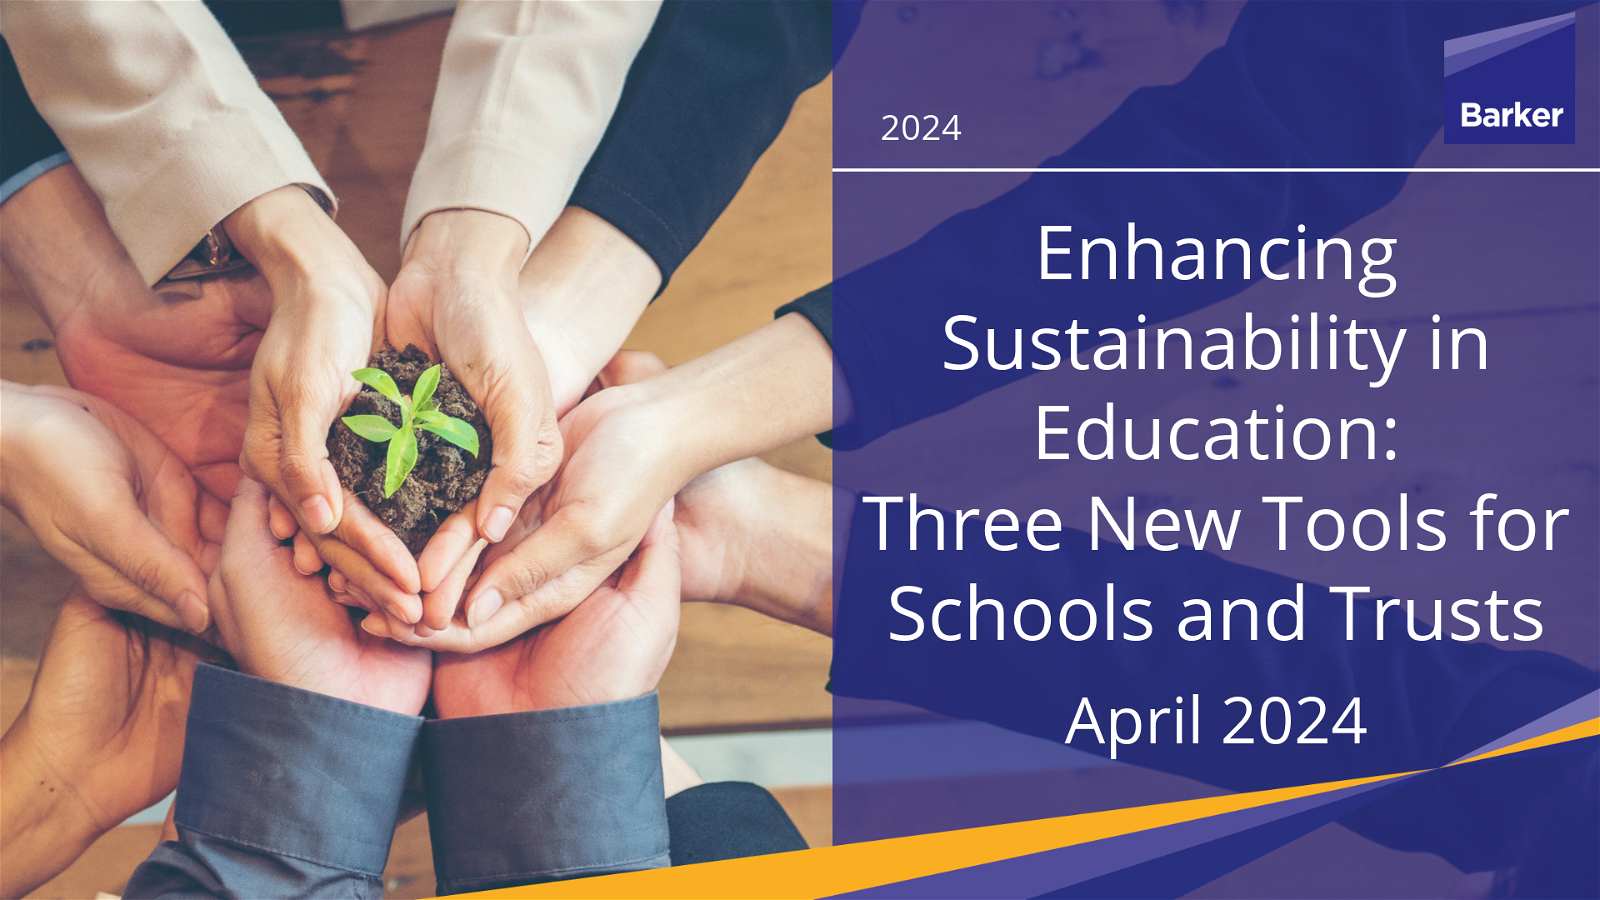 Enhancing Sustainability in Education: Three New Tools for Schools and Trusts